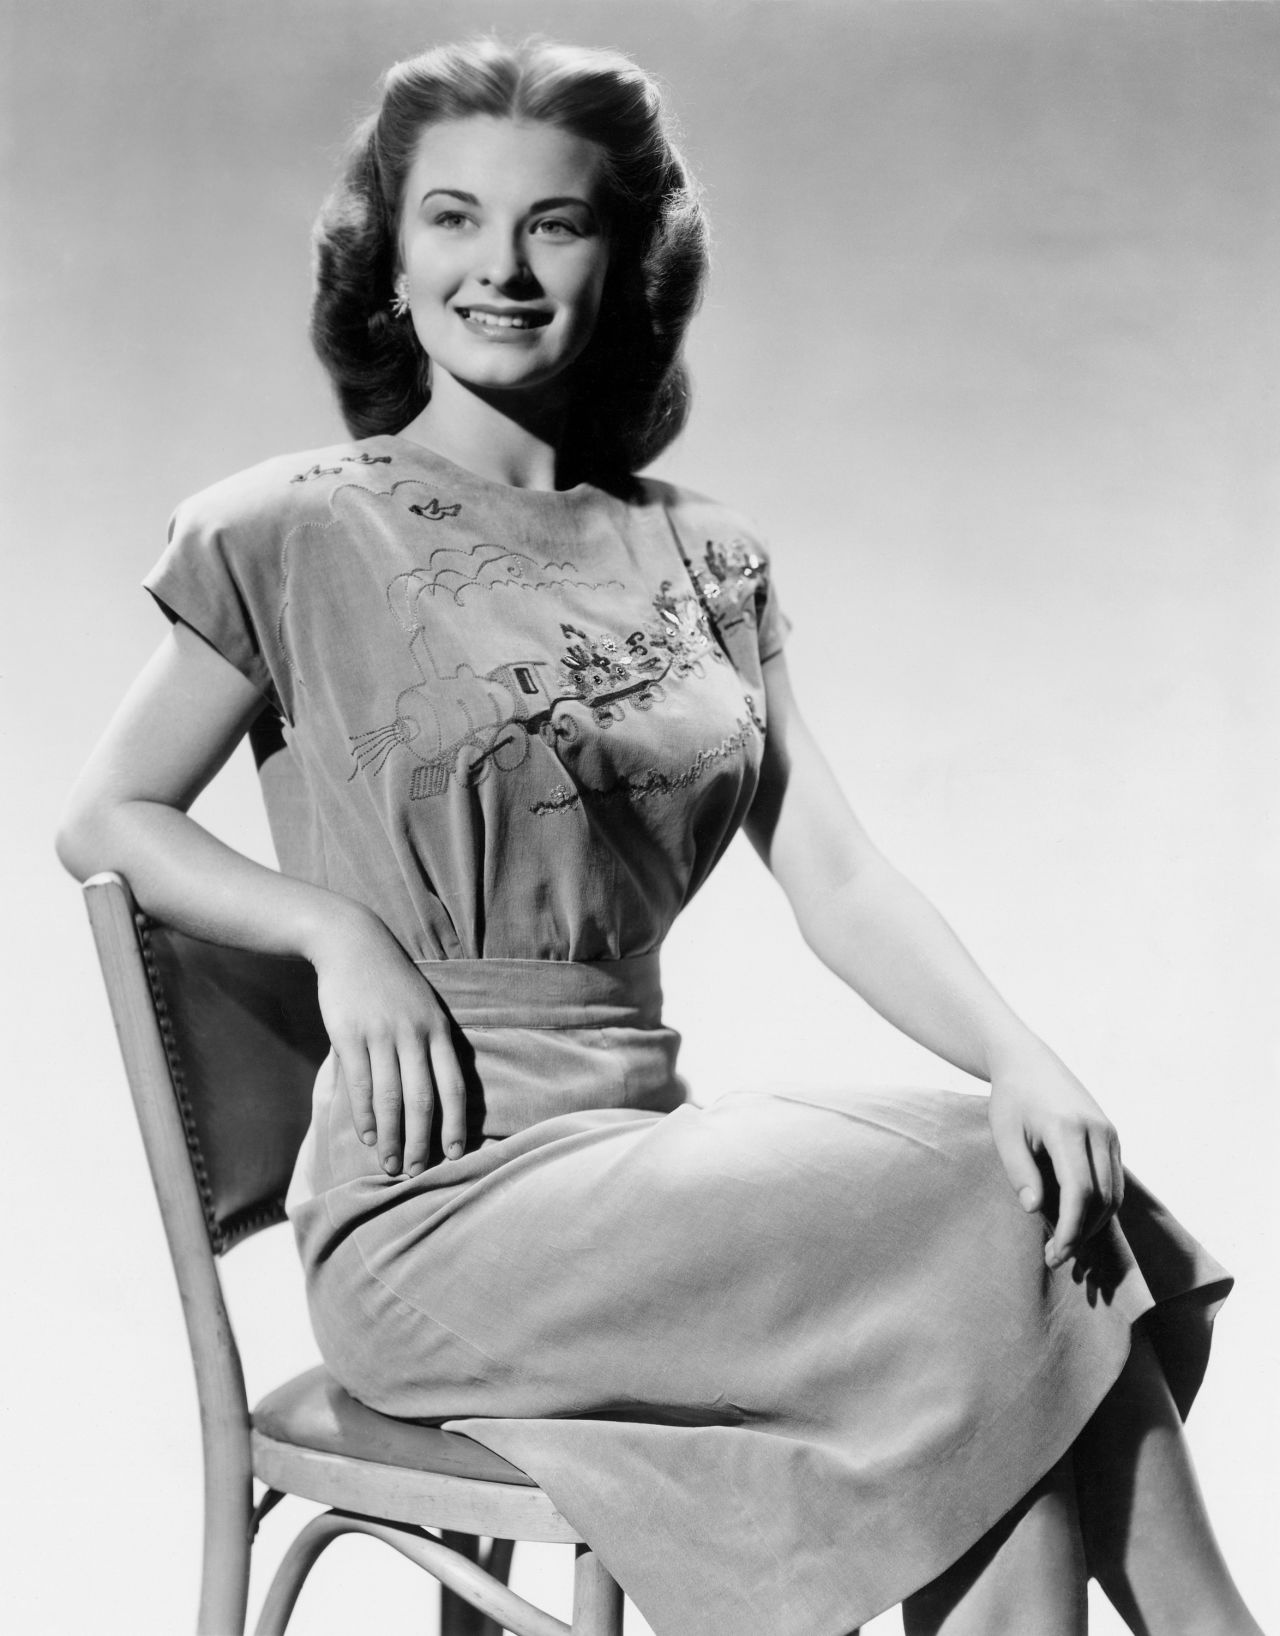 Leachman poses for a photo in 1946. She was a finalist that year in the Miss America pageant.